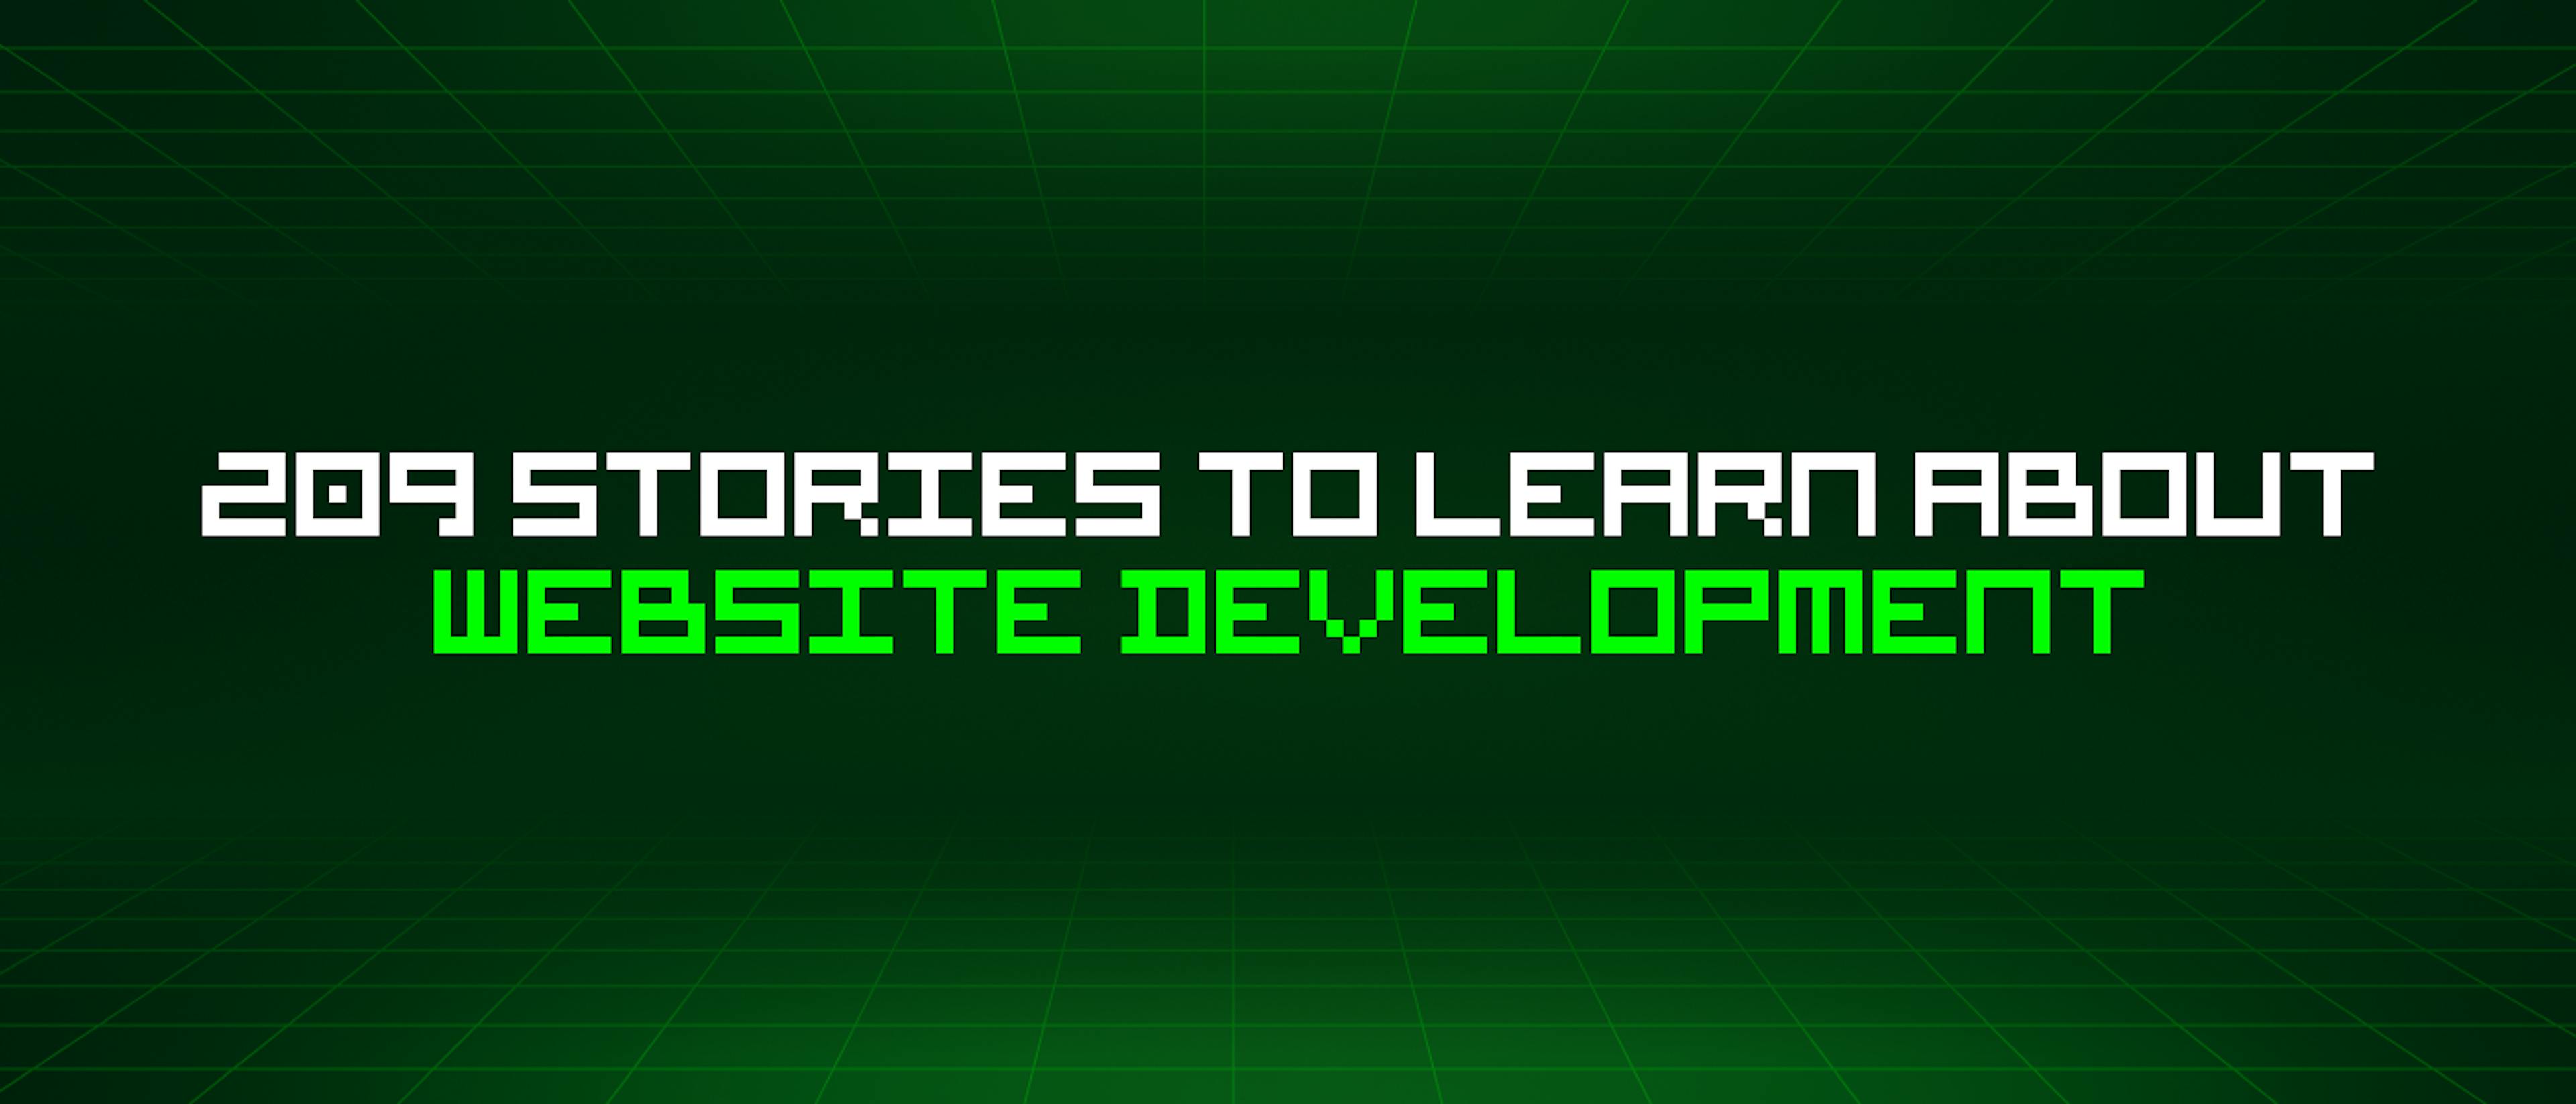 featured image - 209 Stories To Learn About Website Development